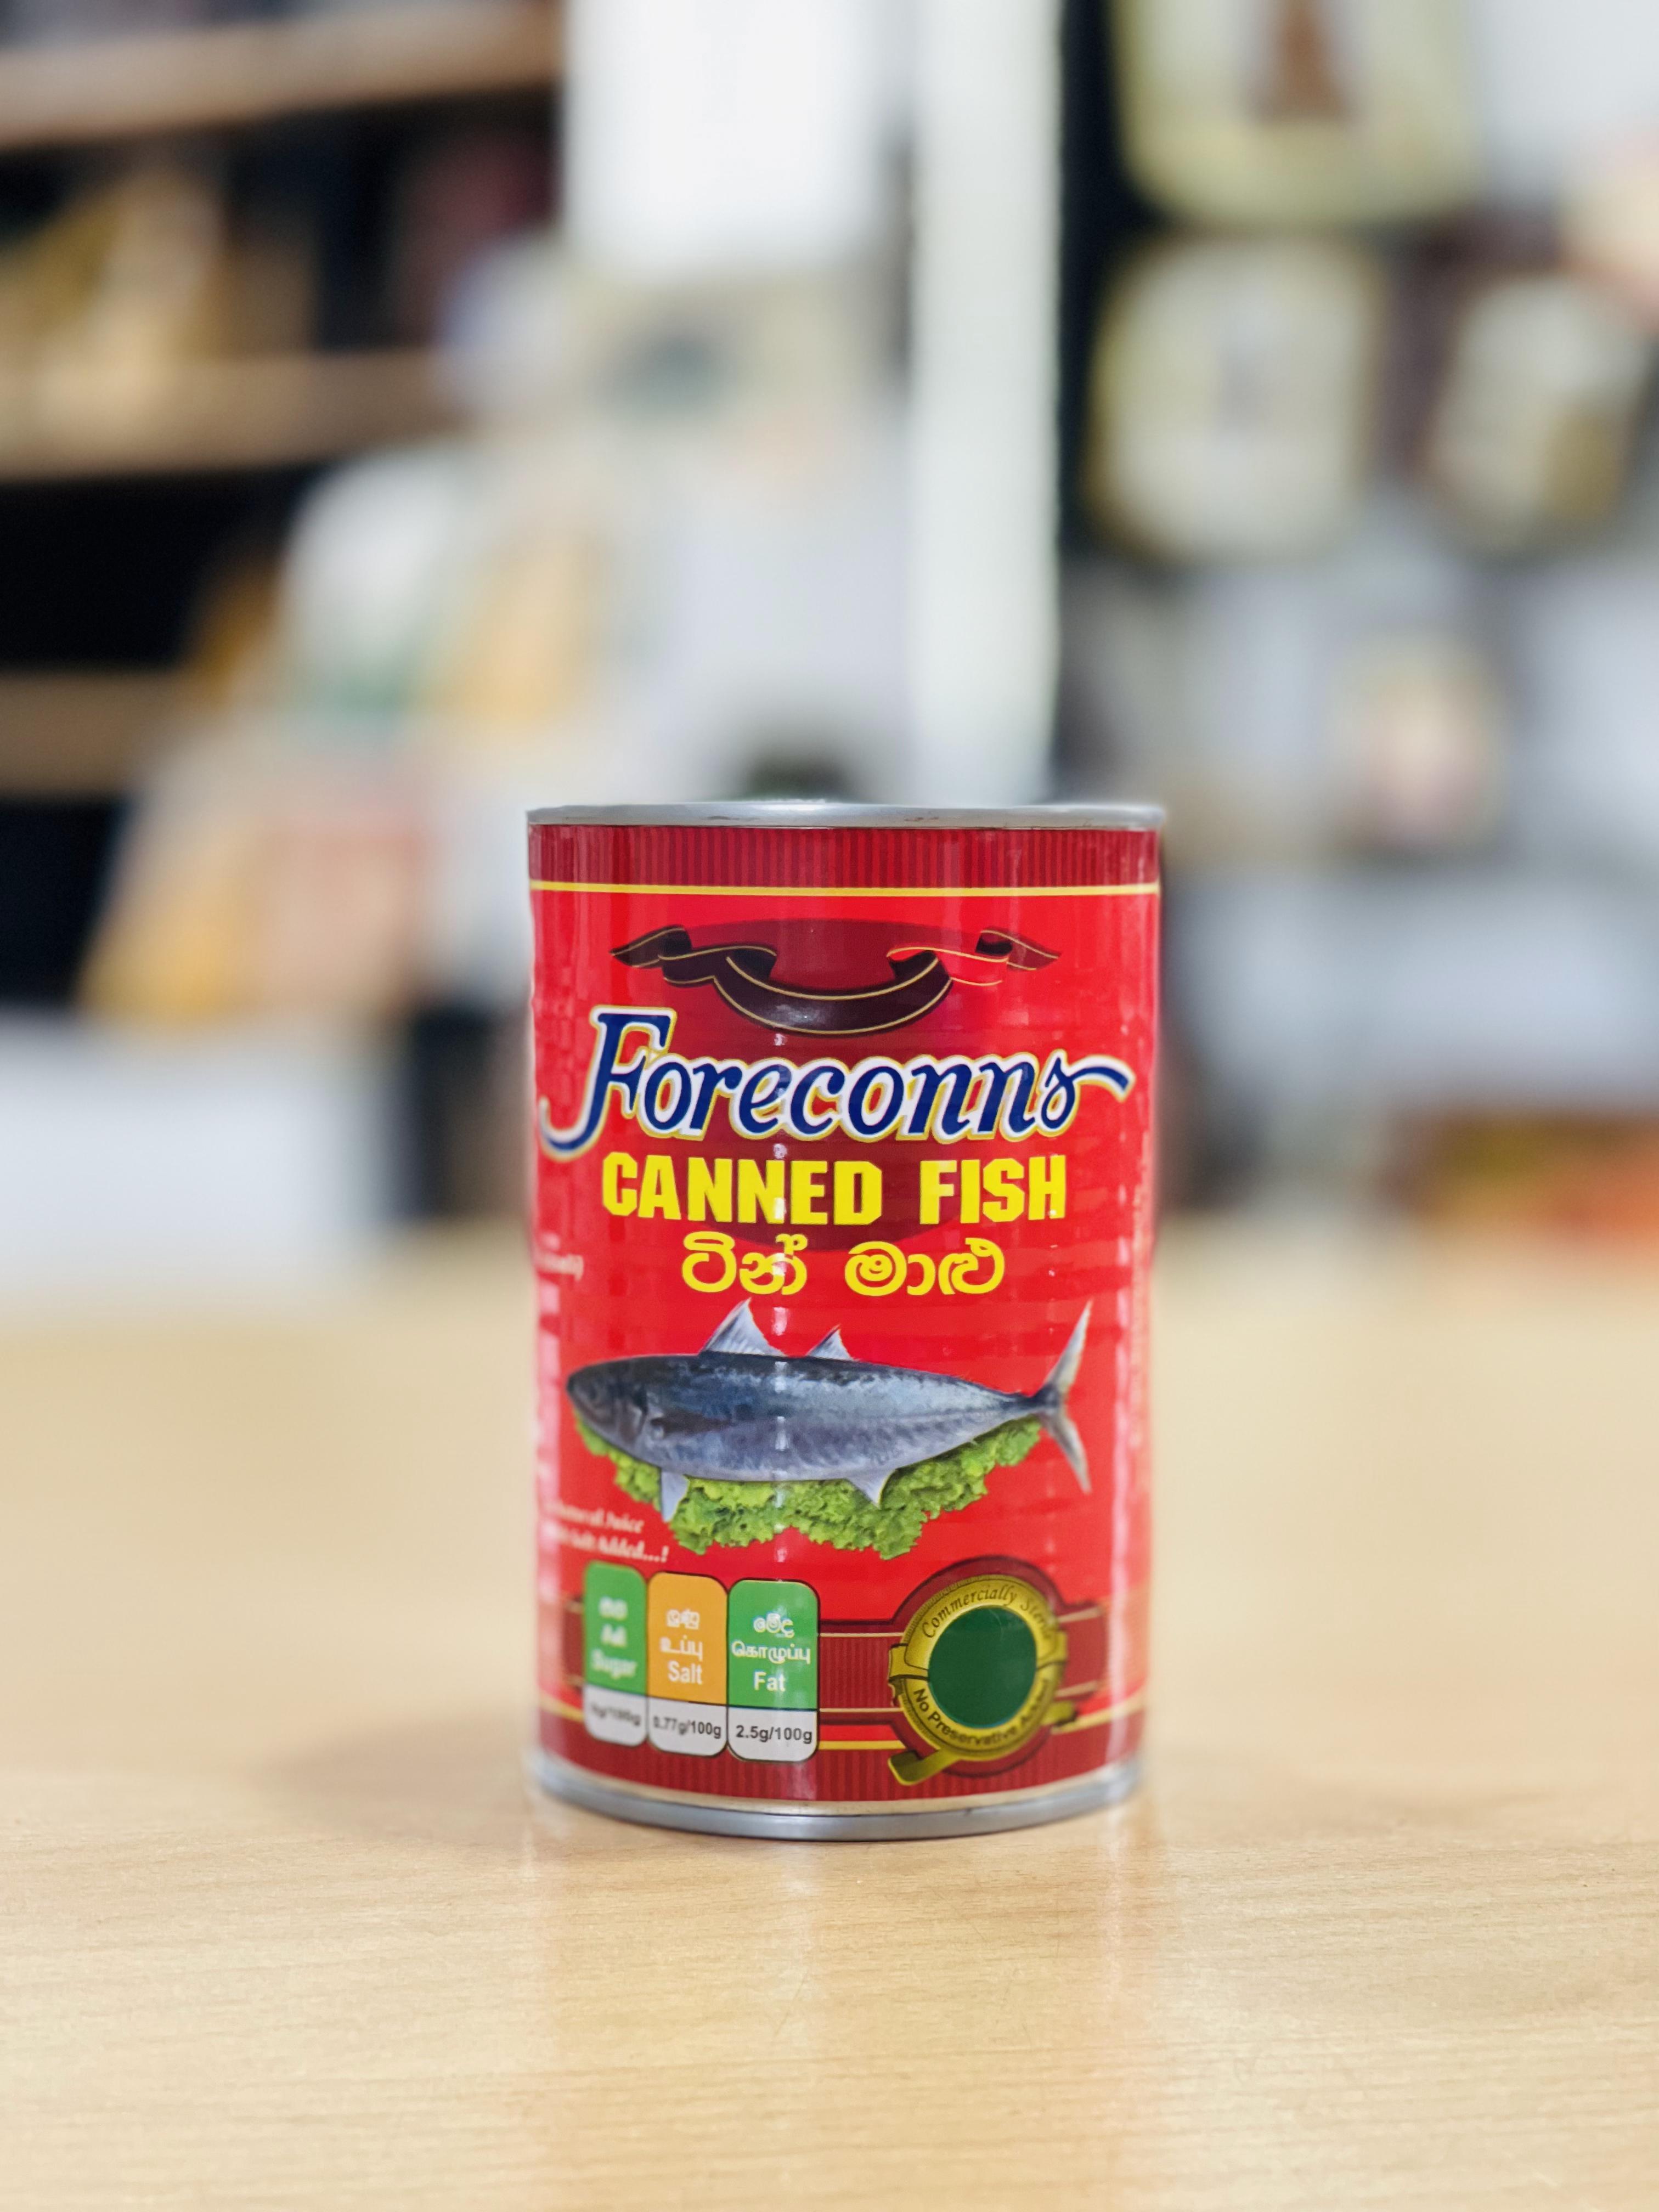 Foreconns Canned Fish